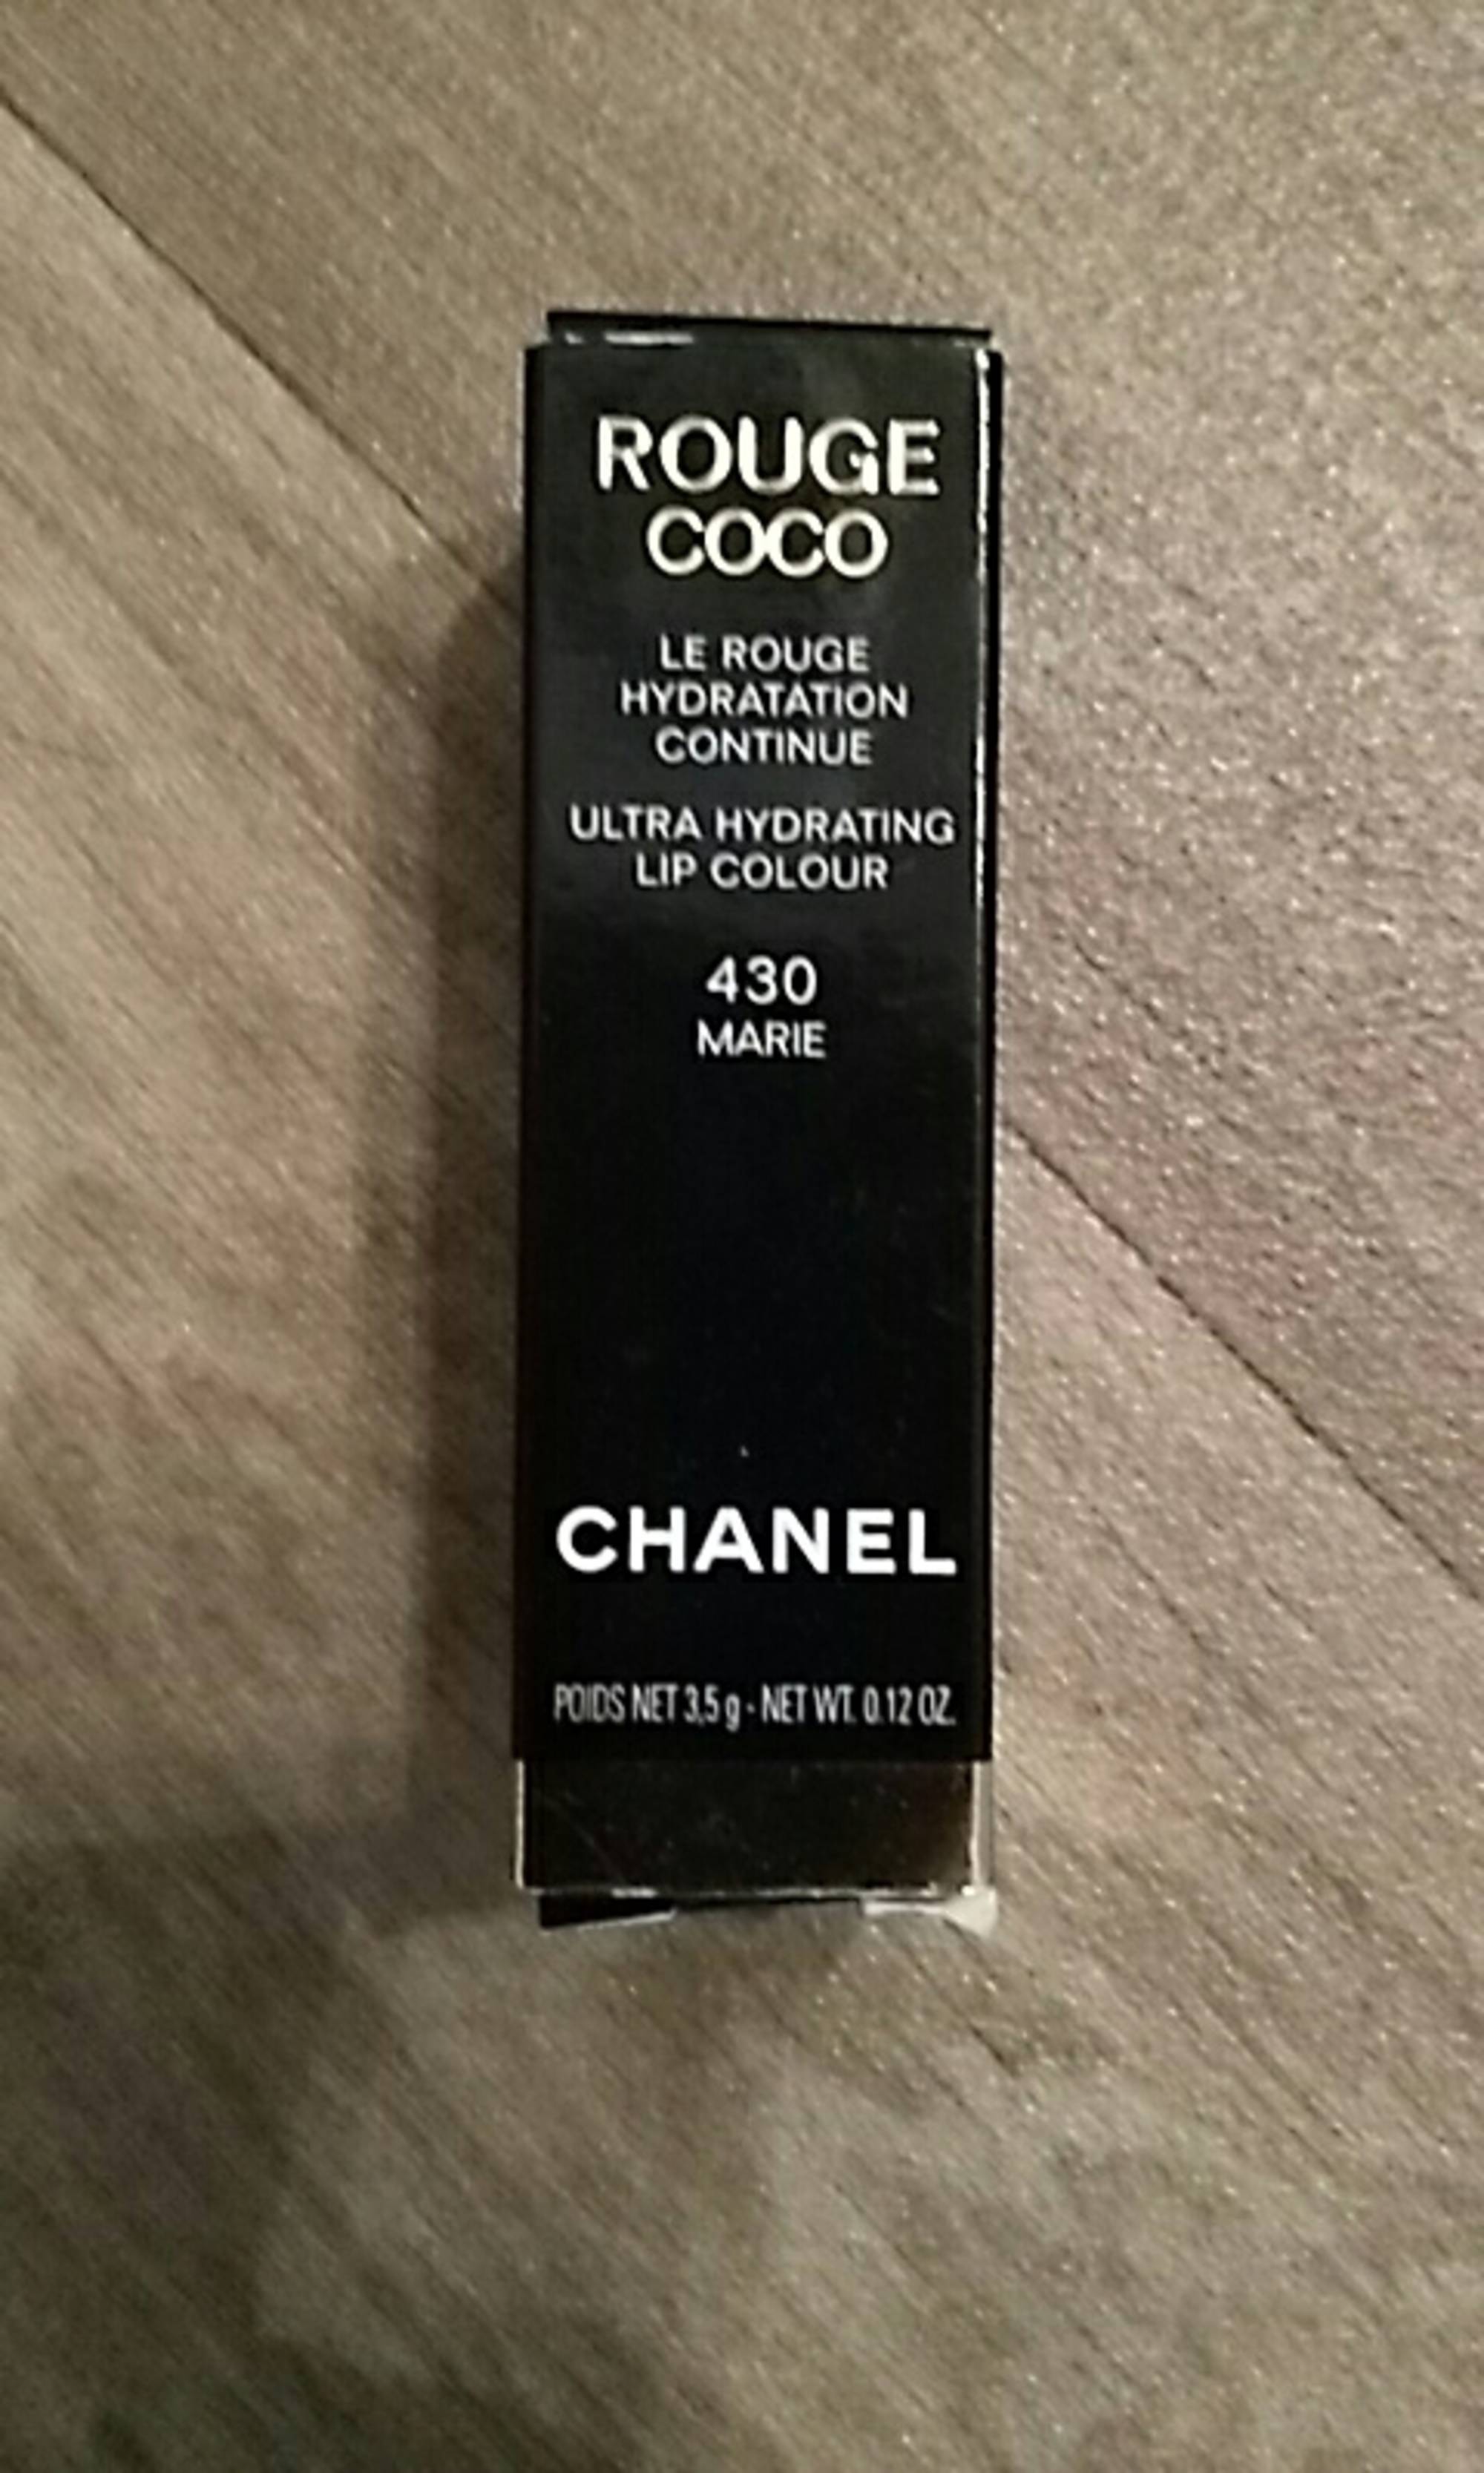 CHANEL - Rouge coco 430 Marie - Le rouge hydratation continue